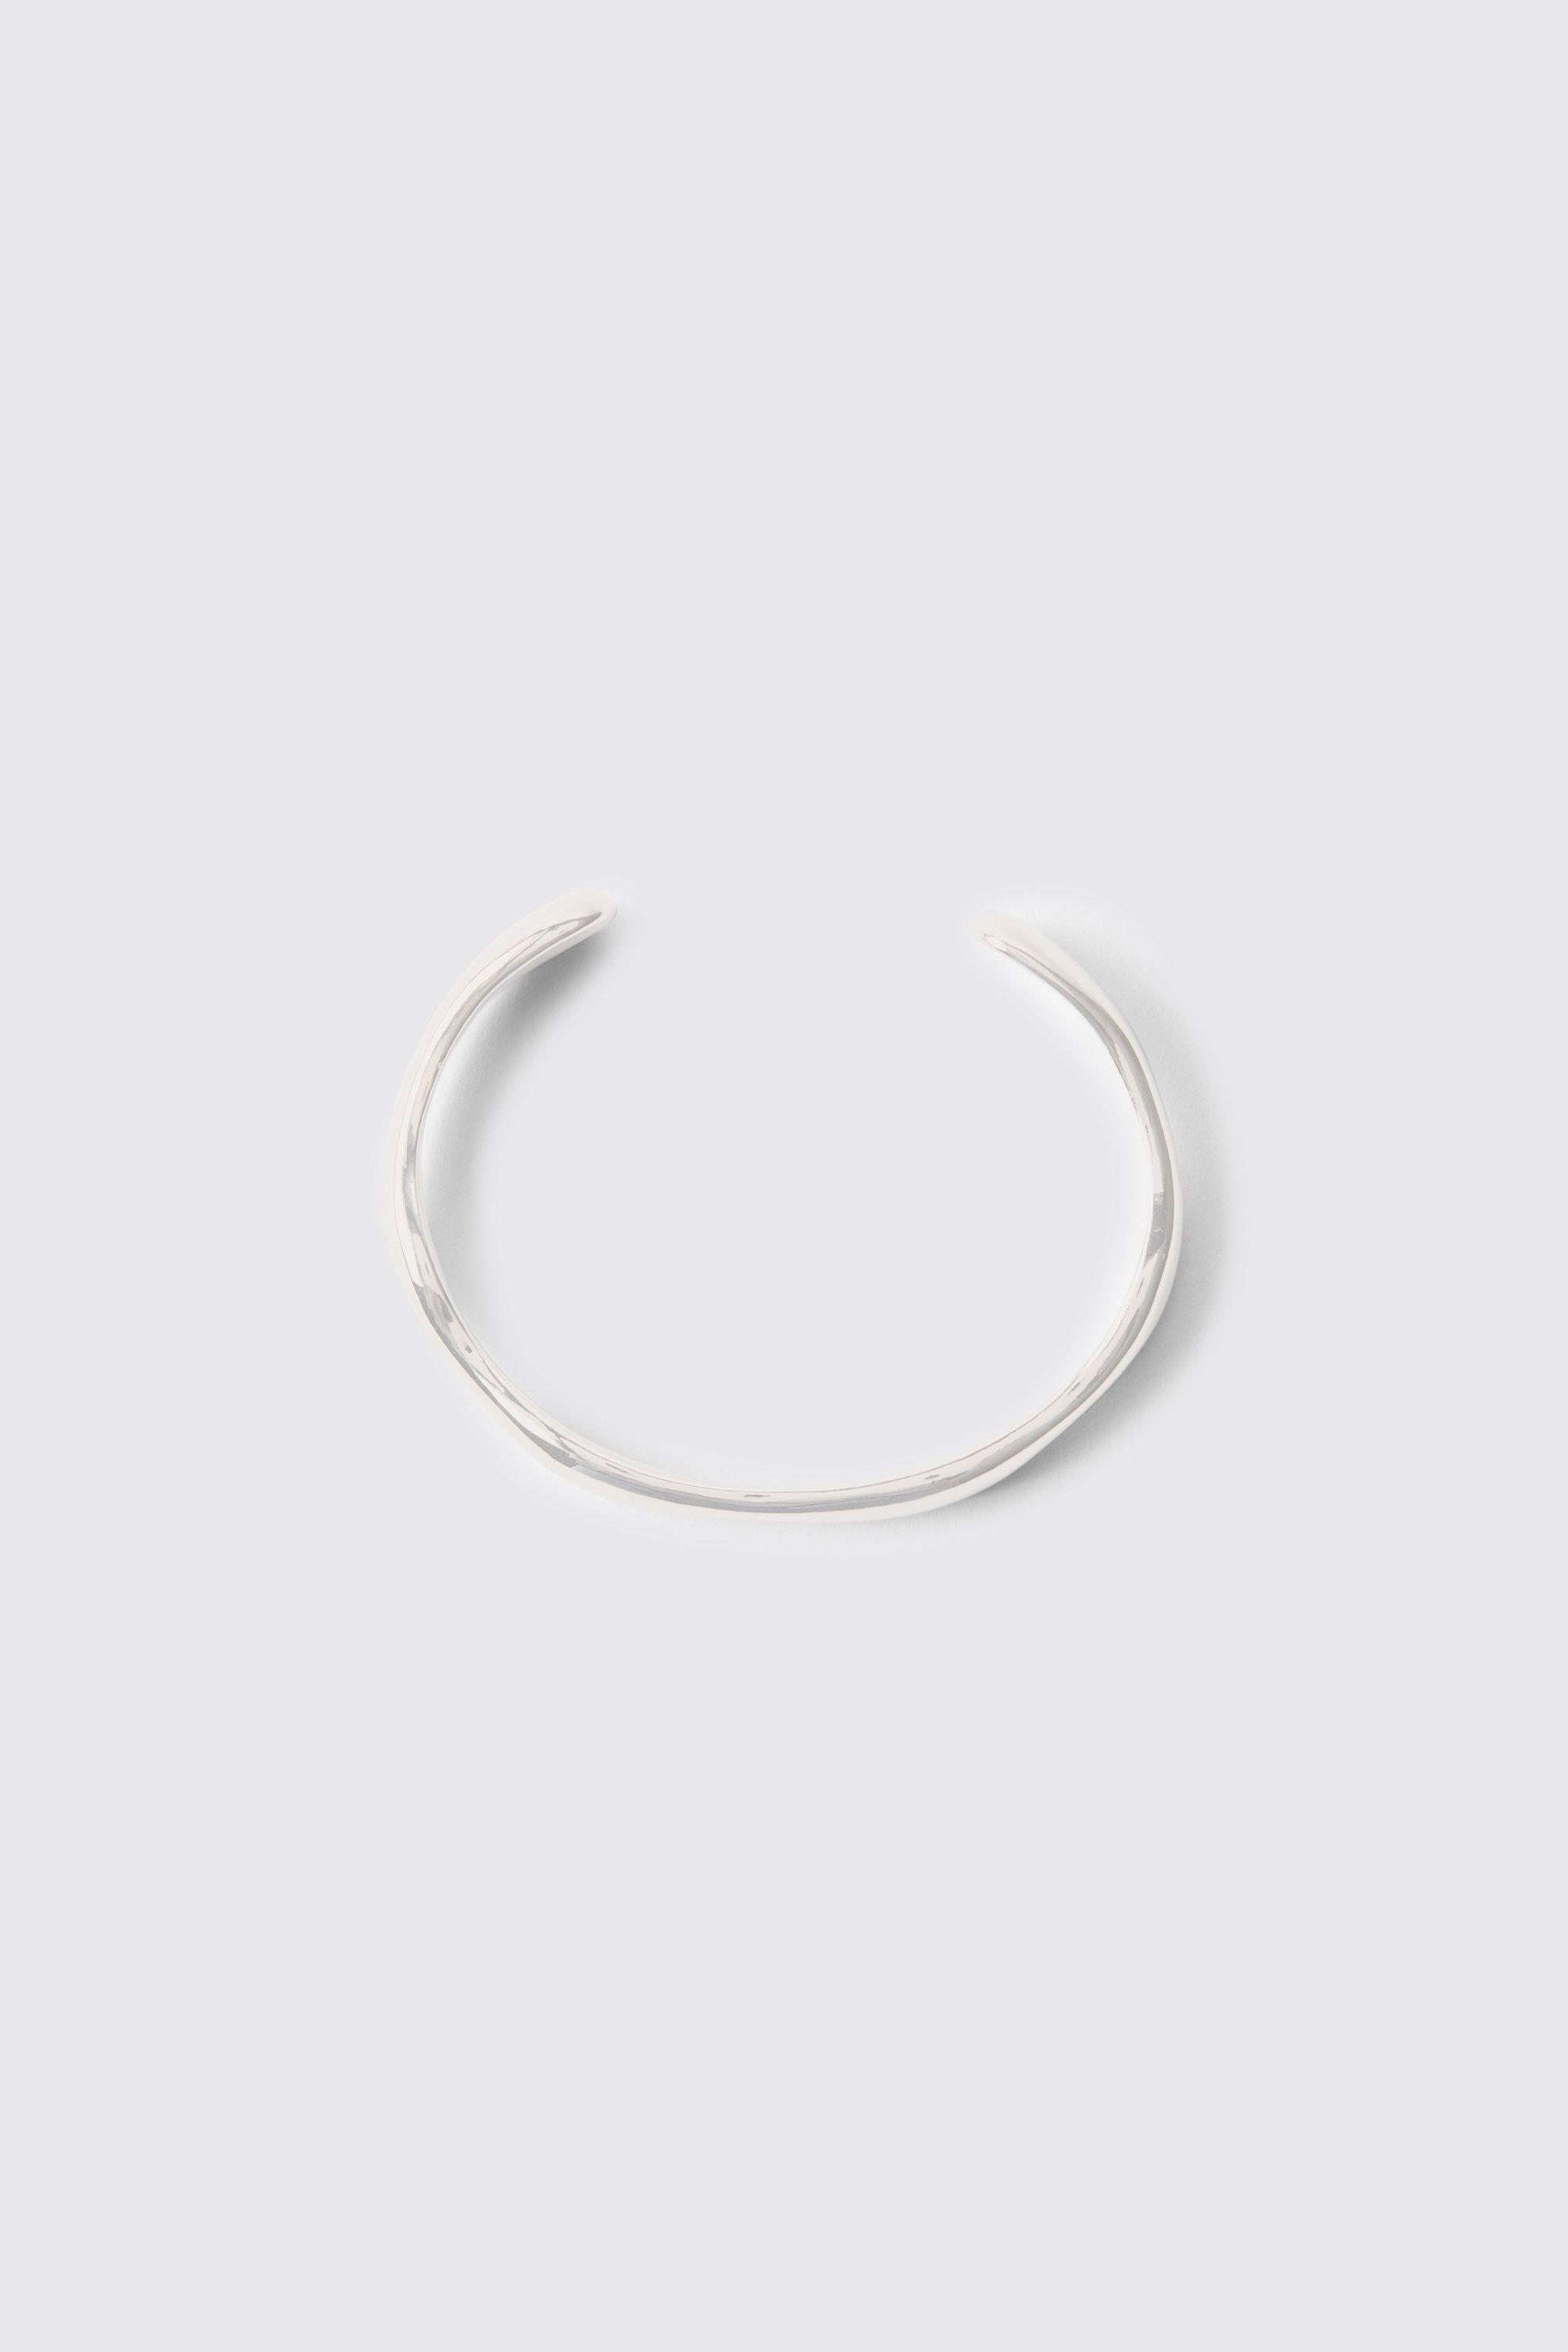 Image of Chunky Silver Bangle In Silver, Grigio